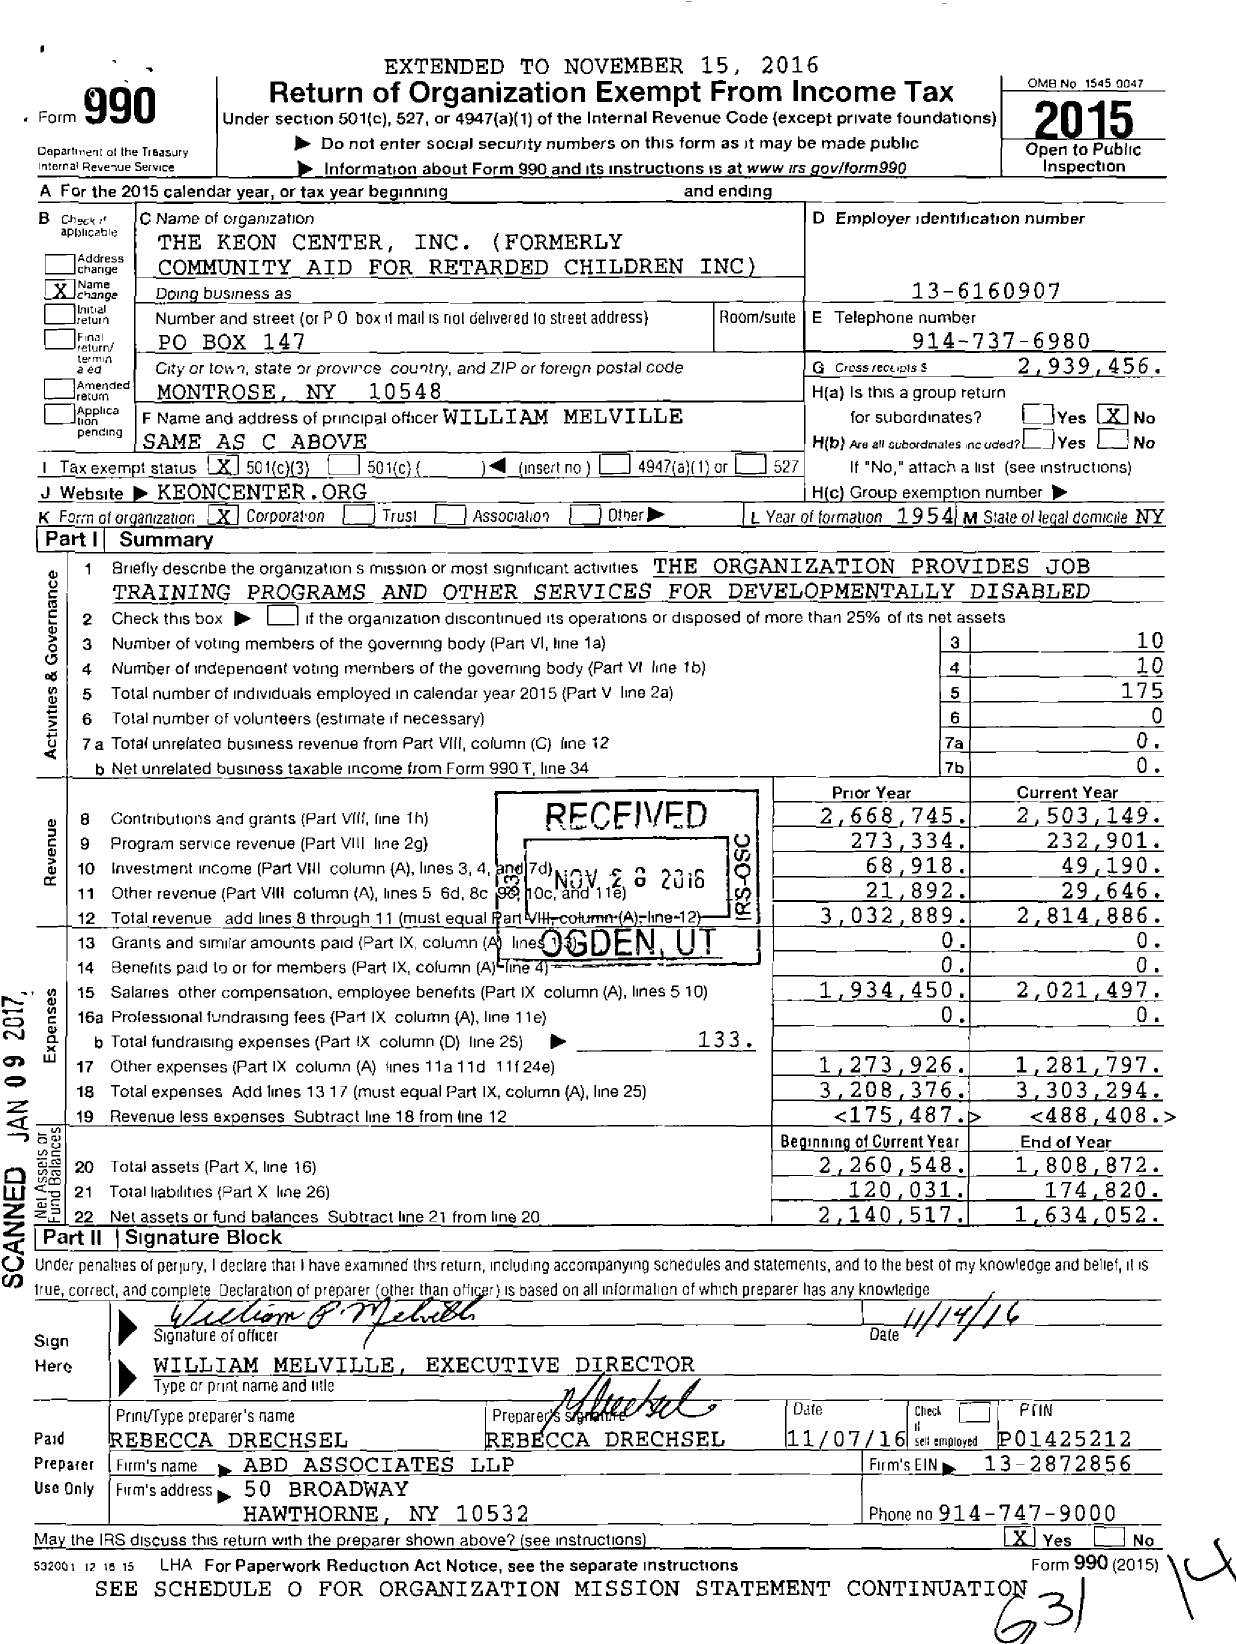 Image of first page of 2015 Form 990 for The Keon Center - Formerly Community Aid for Retarded Children